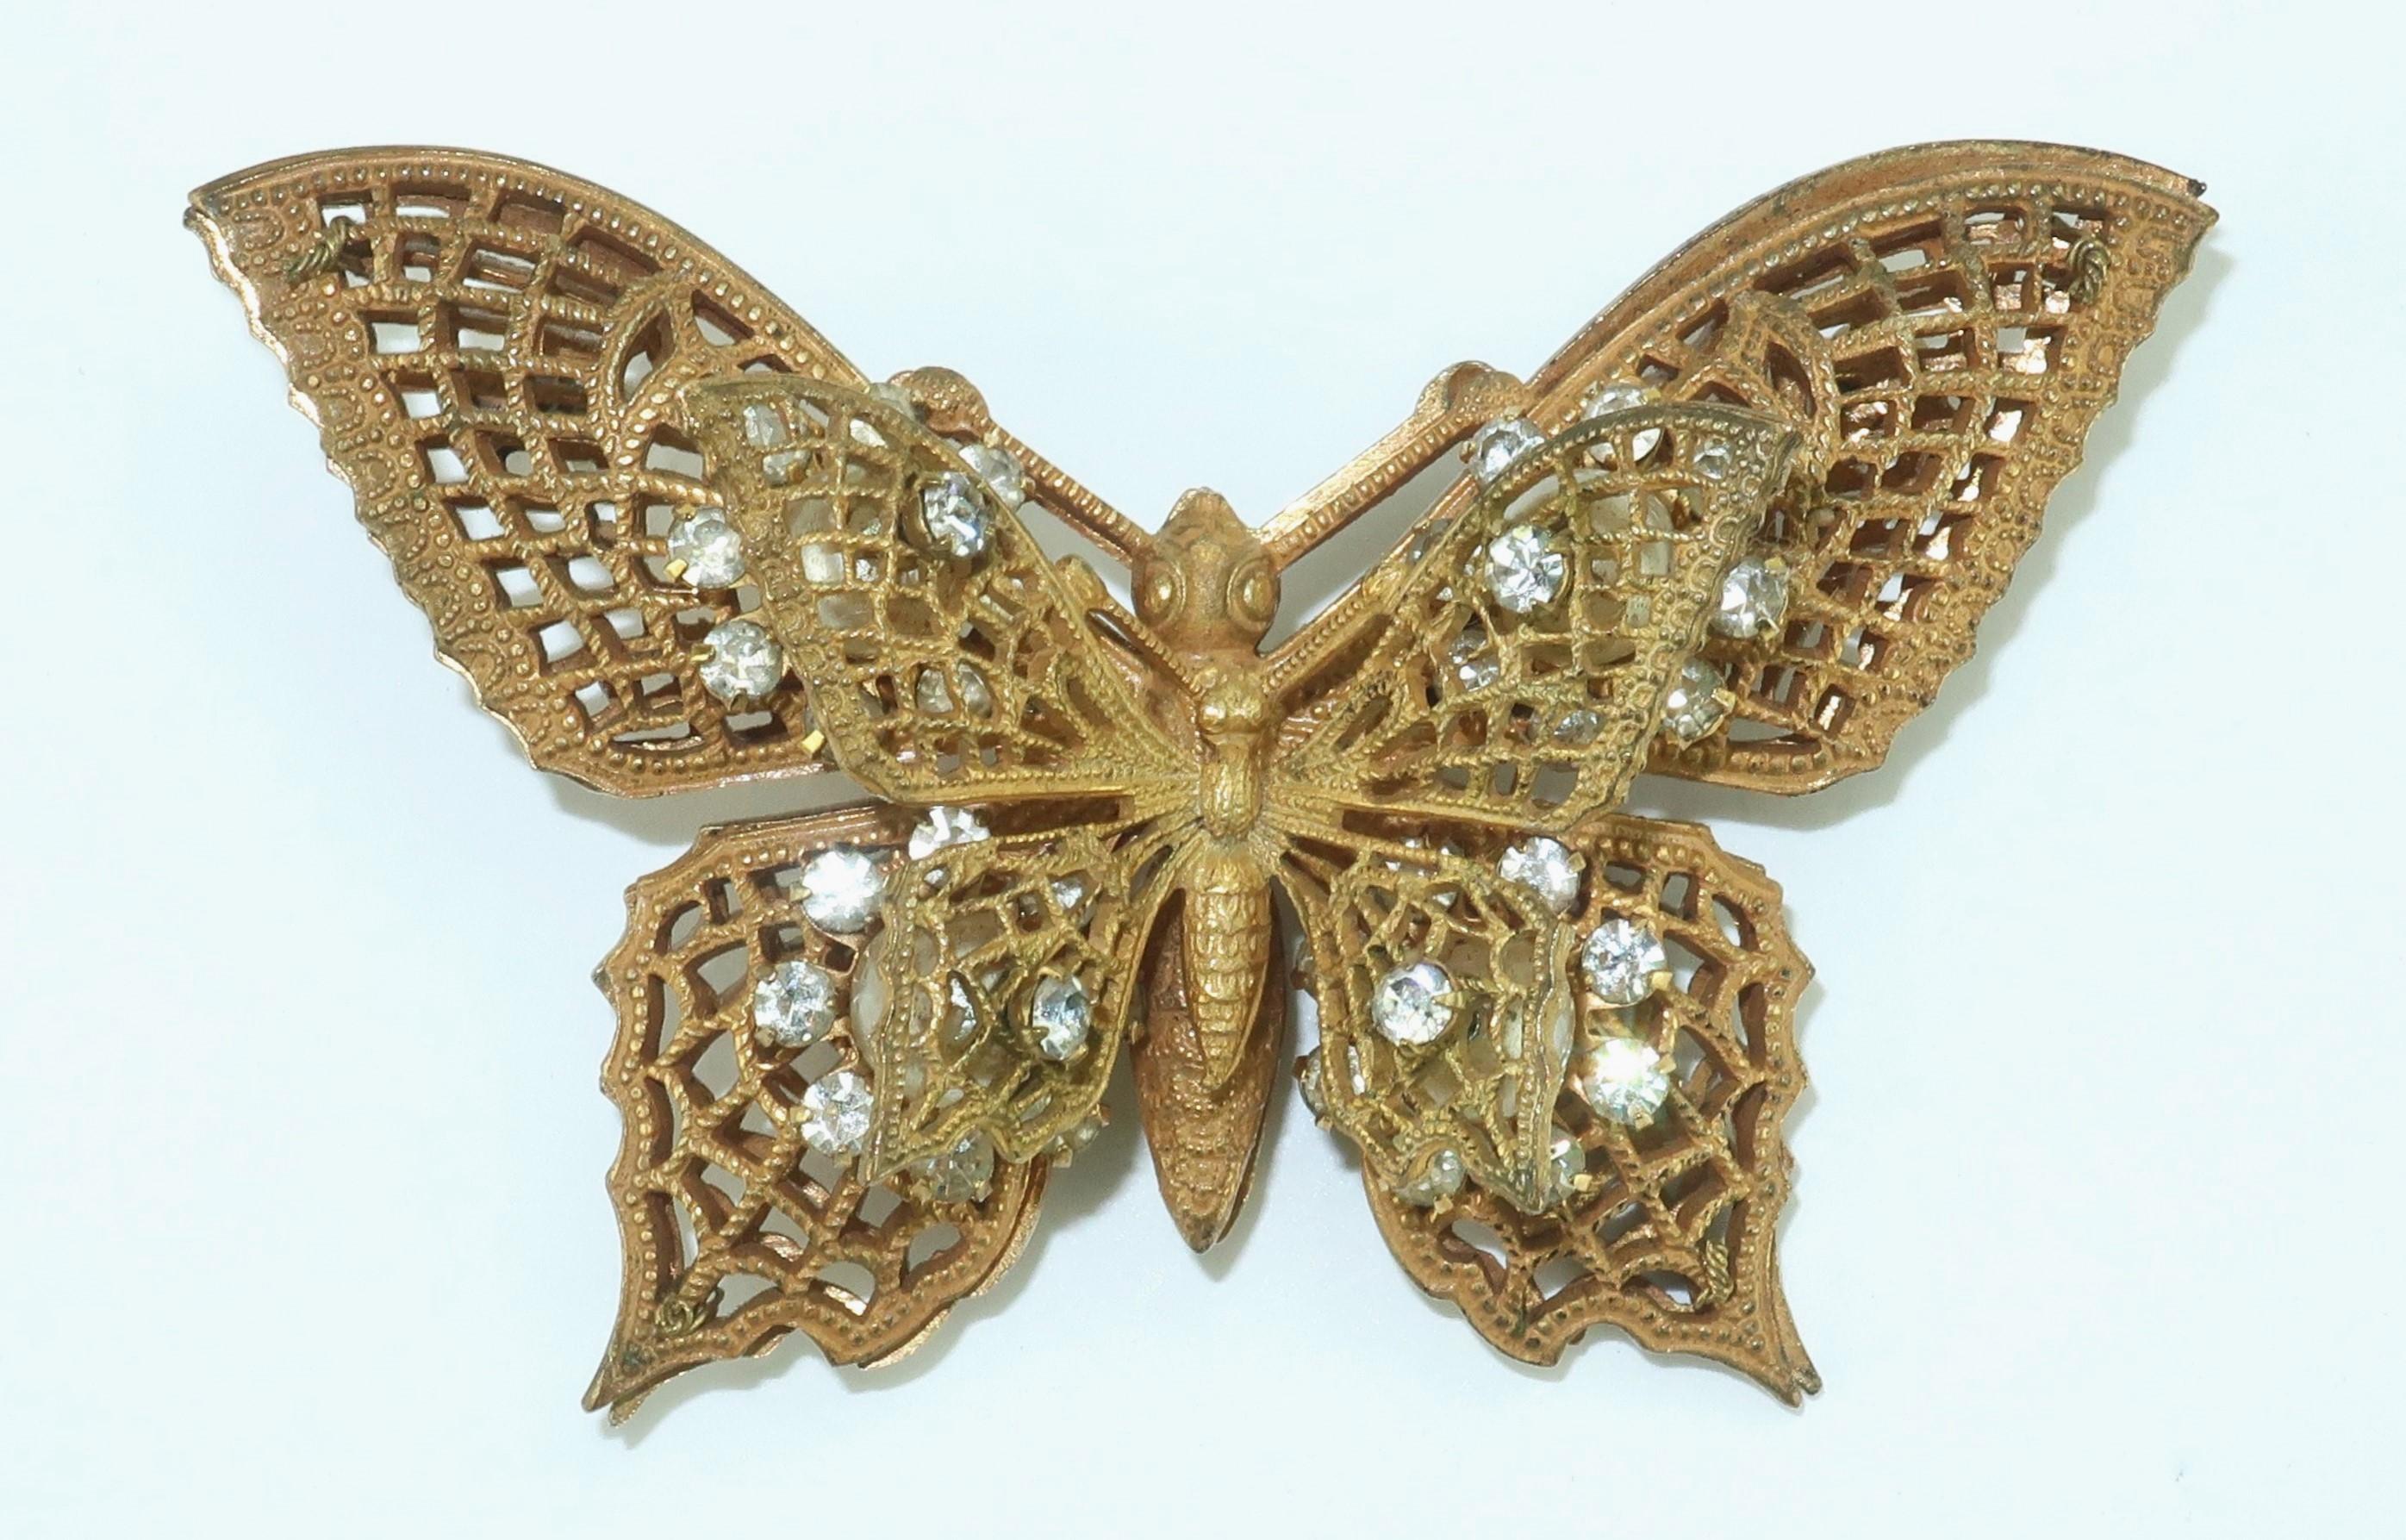 Beautiful 1950's Miriam Haskell brooch in the form of a gilt metal butterfly embellished with baroque faux pearls and sparkling crystal rhinestones. The brooch is highly detailed with an ornate filigree typical of Ms. Haskell's designs including